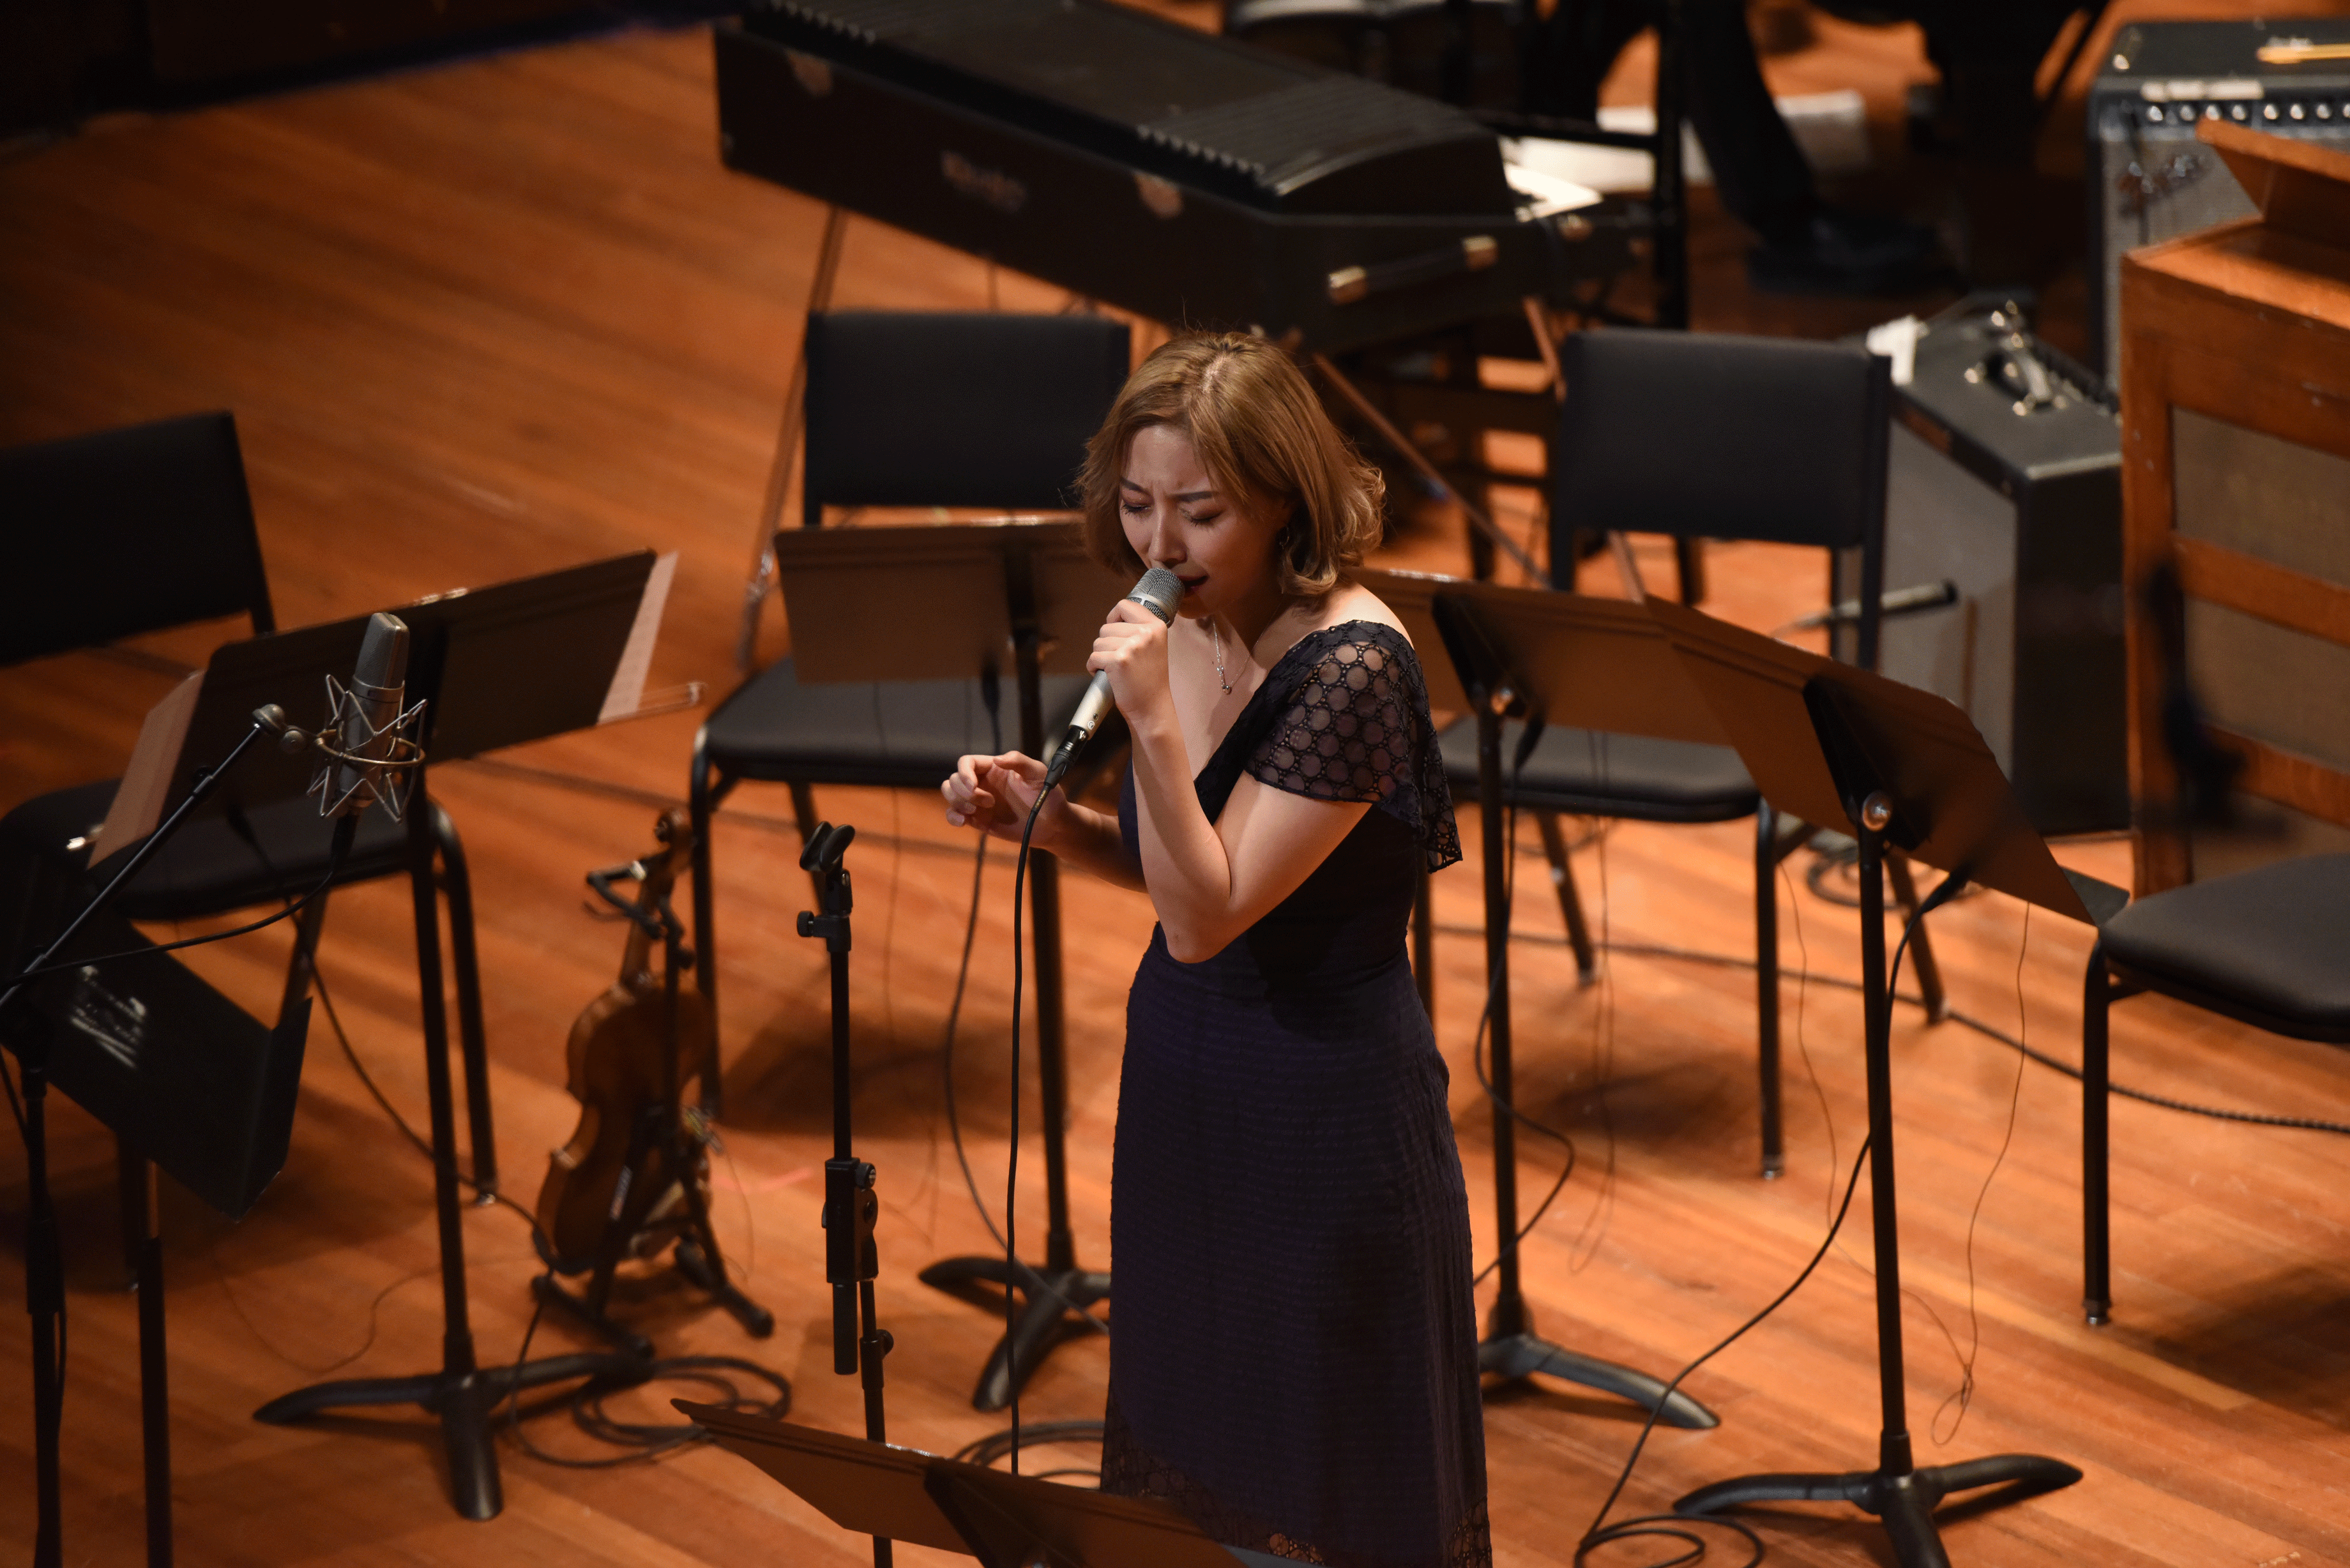 Vocalist Cordelia Tapping sings during The Music of Ran Blake concert